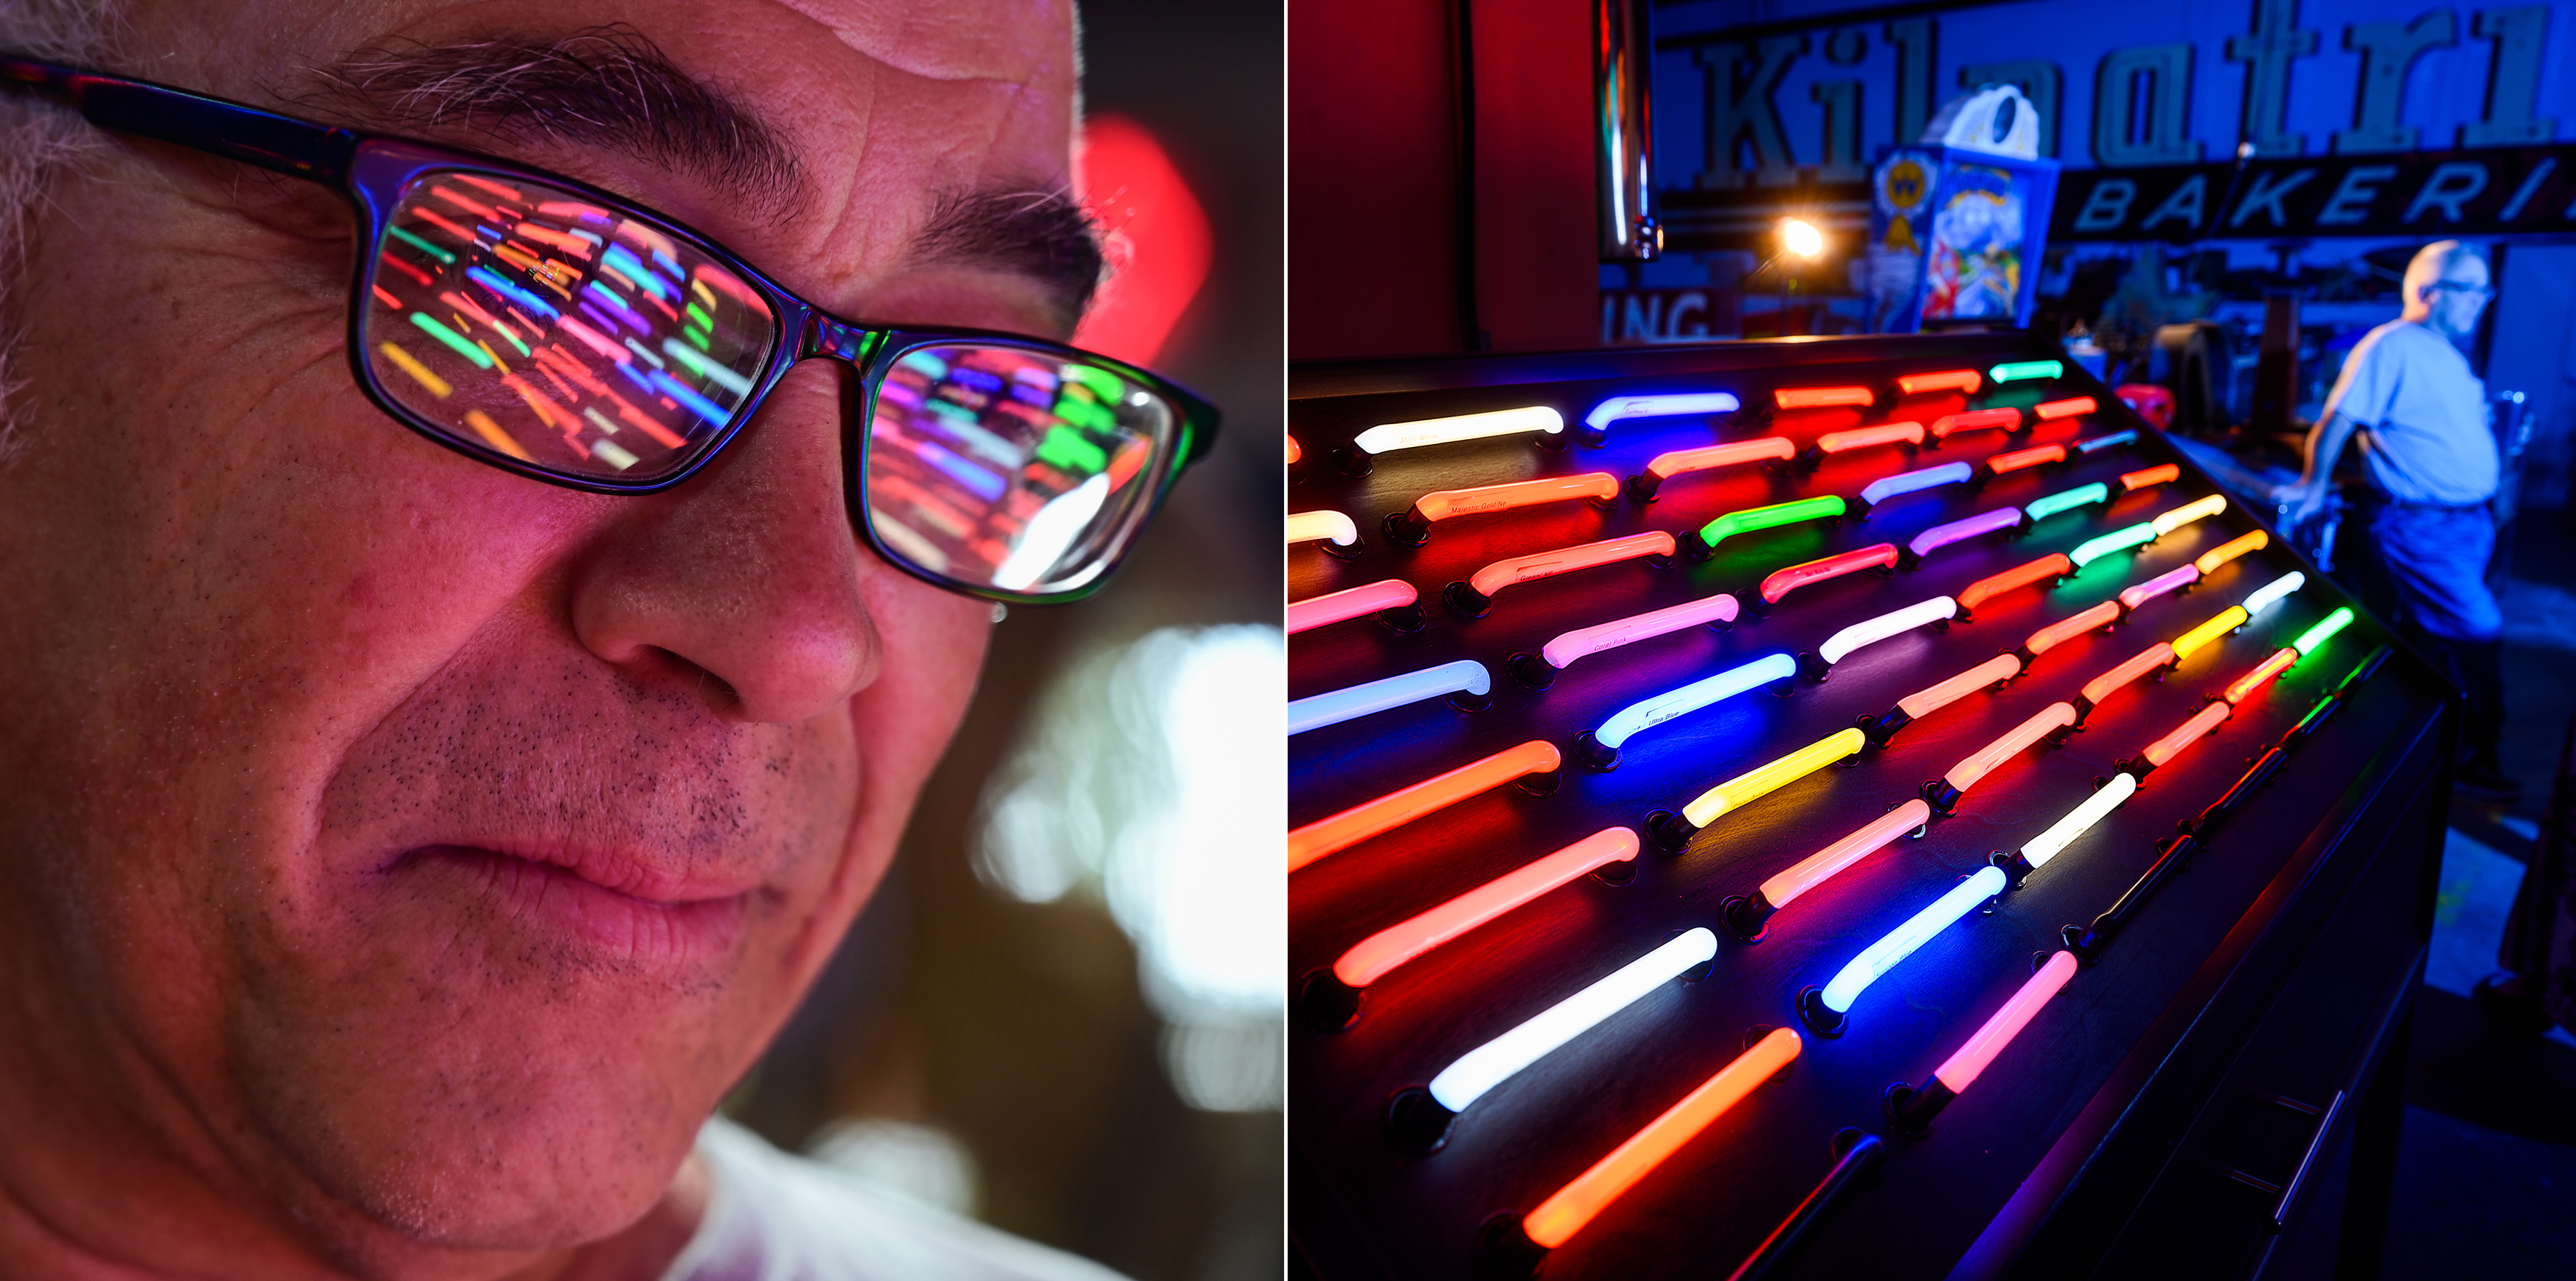 2 side by side photos - one of a neon lights being reflected off Jim Rizzo’s eye glasses, owner of Neon Works and a table of horizontal neon lights for customers to view at Neon Works workshop.